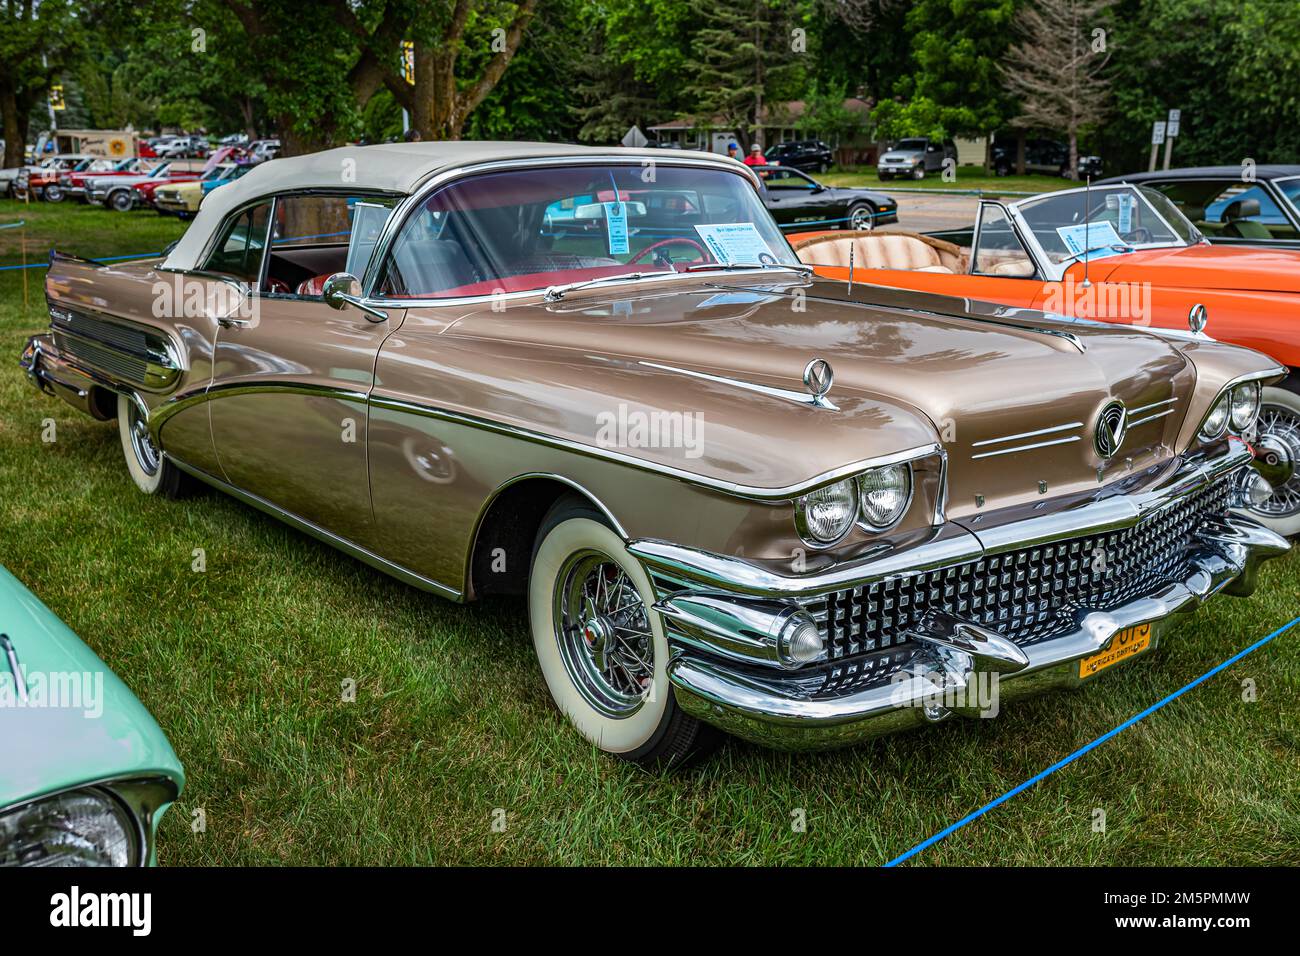 Iola, WI - July 07, 2022: High perspective front corner view of a 1958 Buick Century Convertible at a local car show. Stock Photo